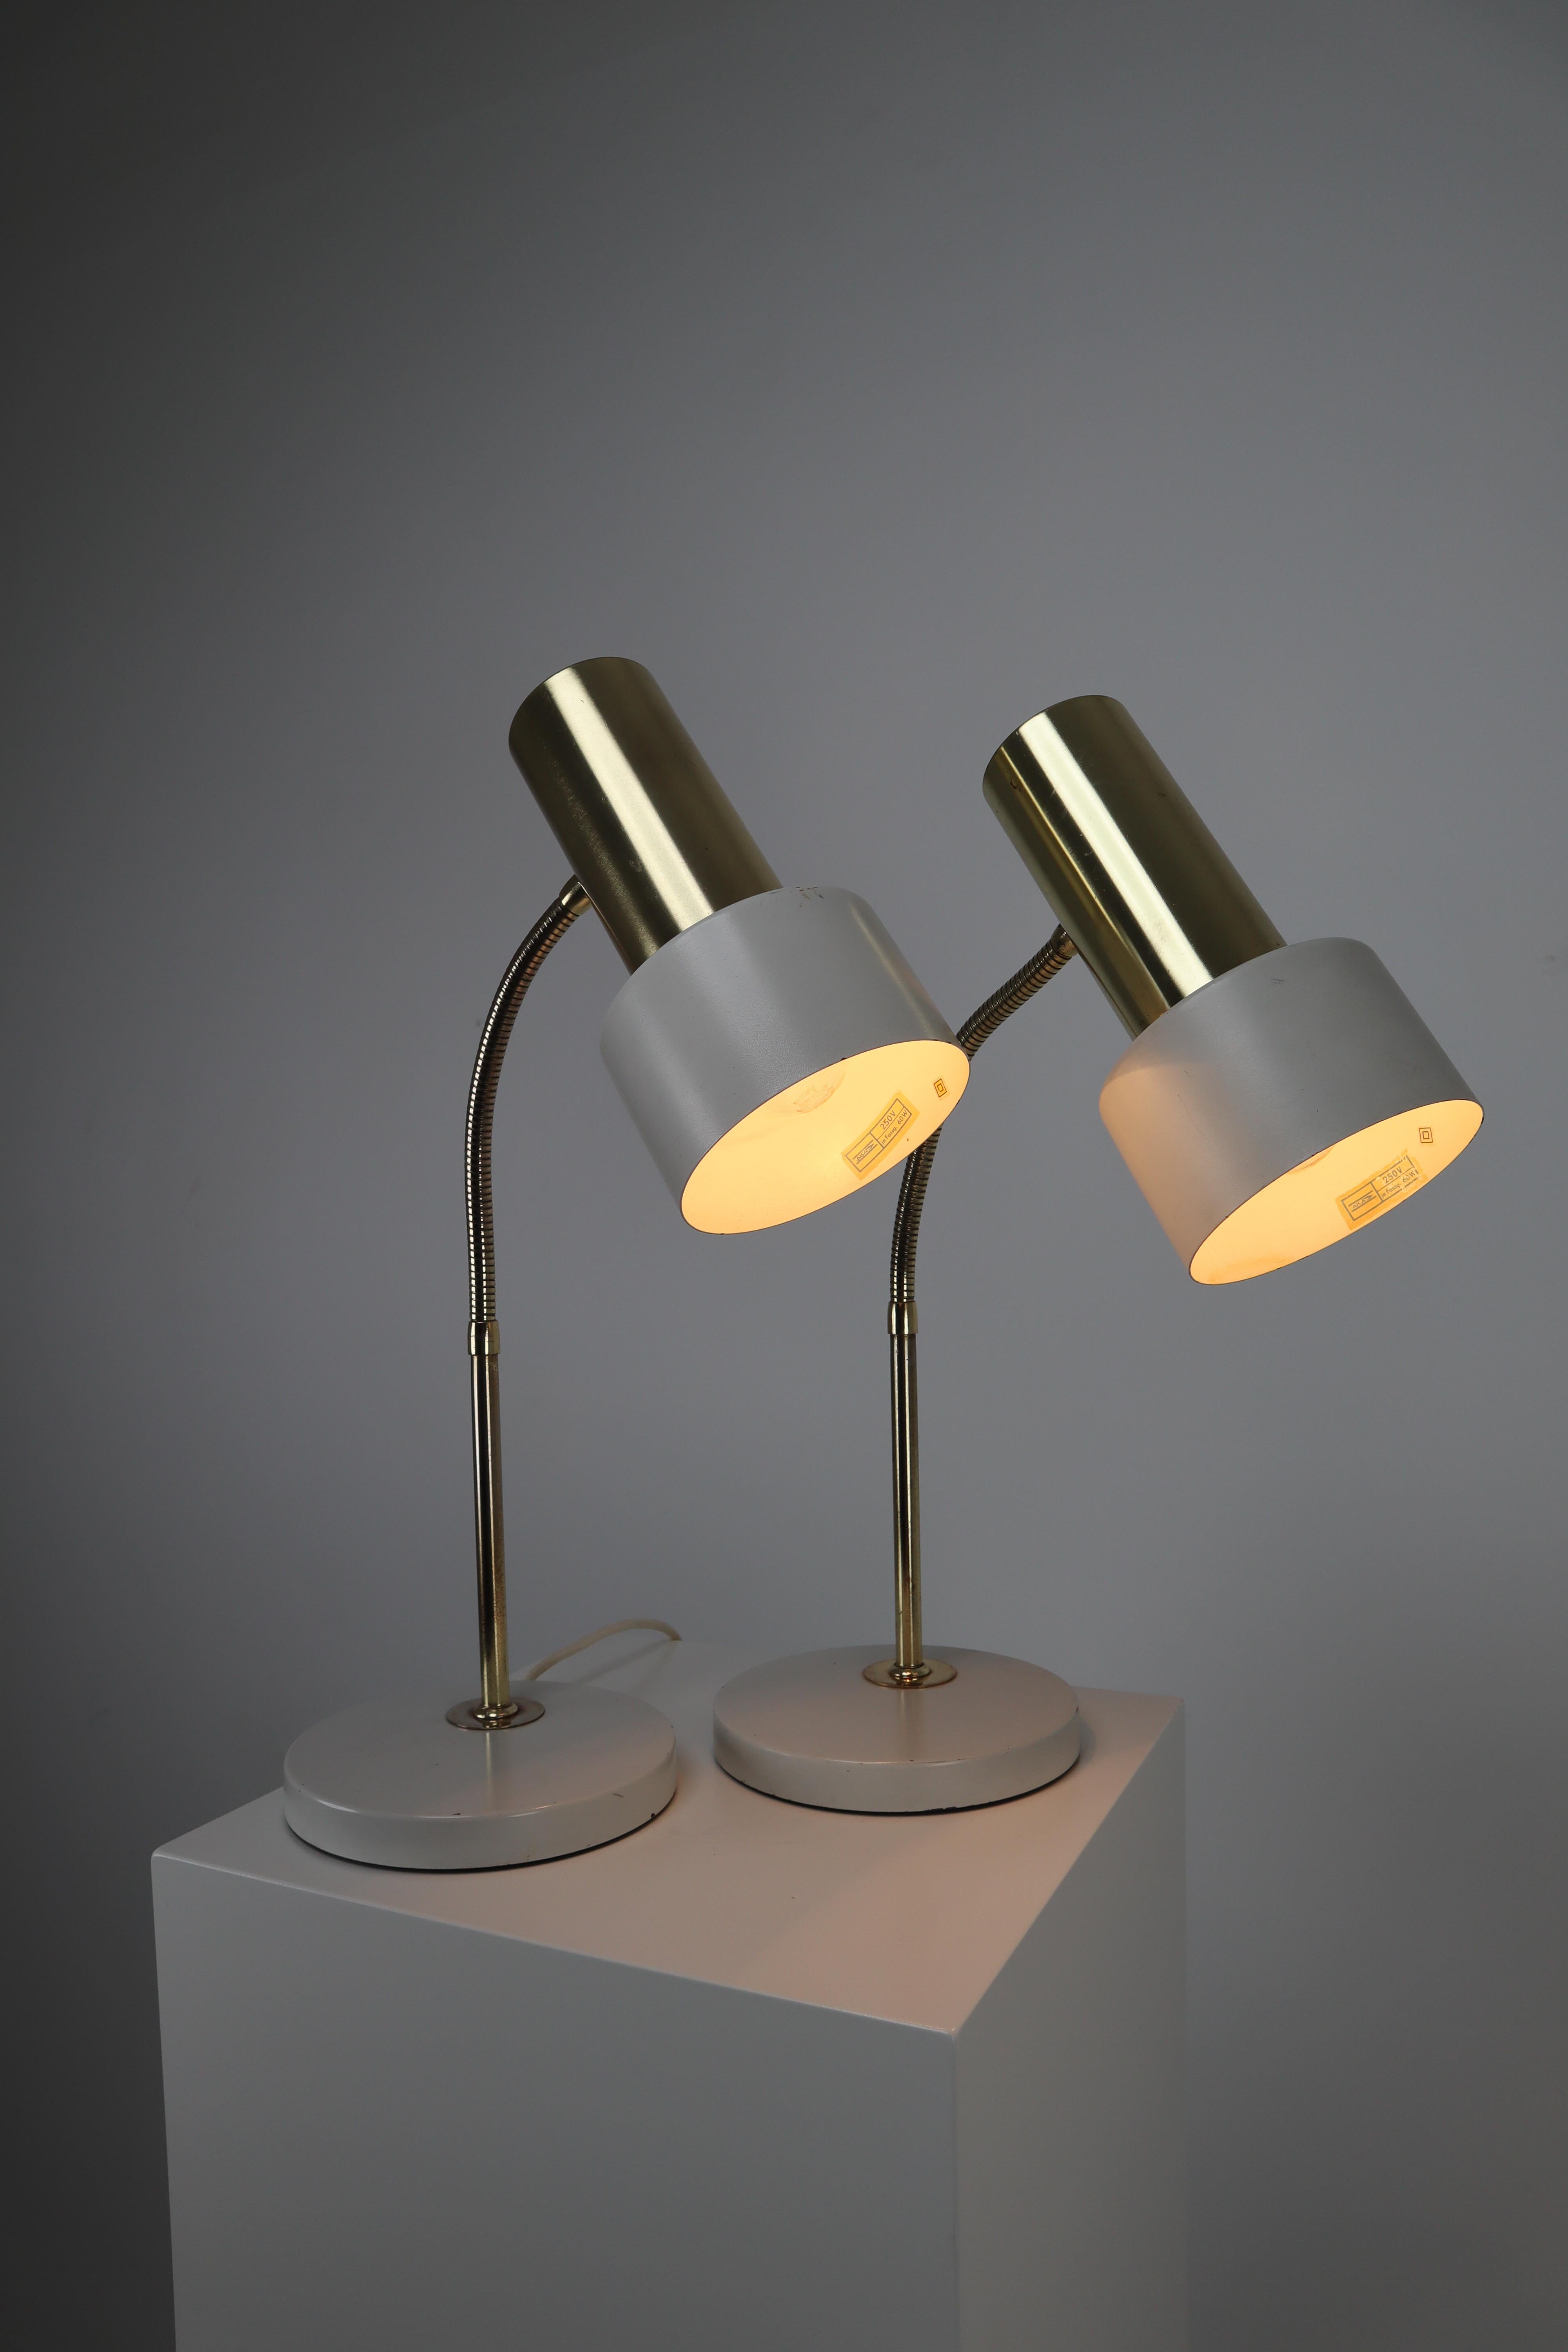 Late 20th Century Pair of Mid-century Modern Desk or Table Lamps, Bedside Lights, Germany, 1970s